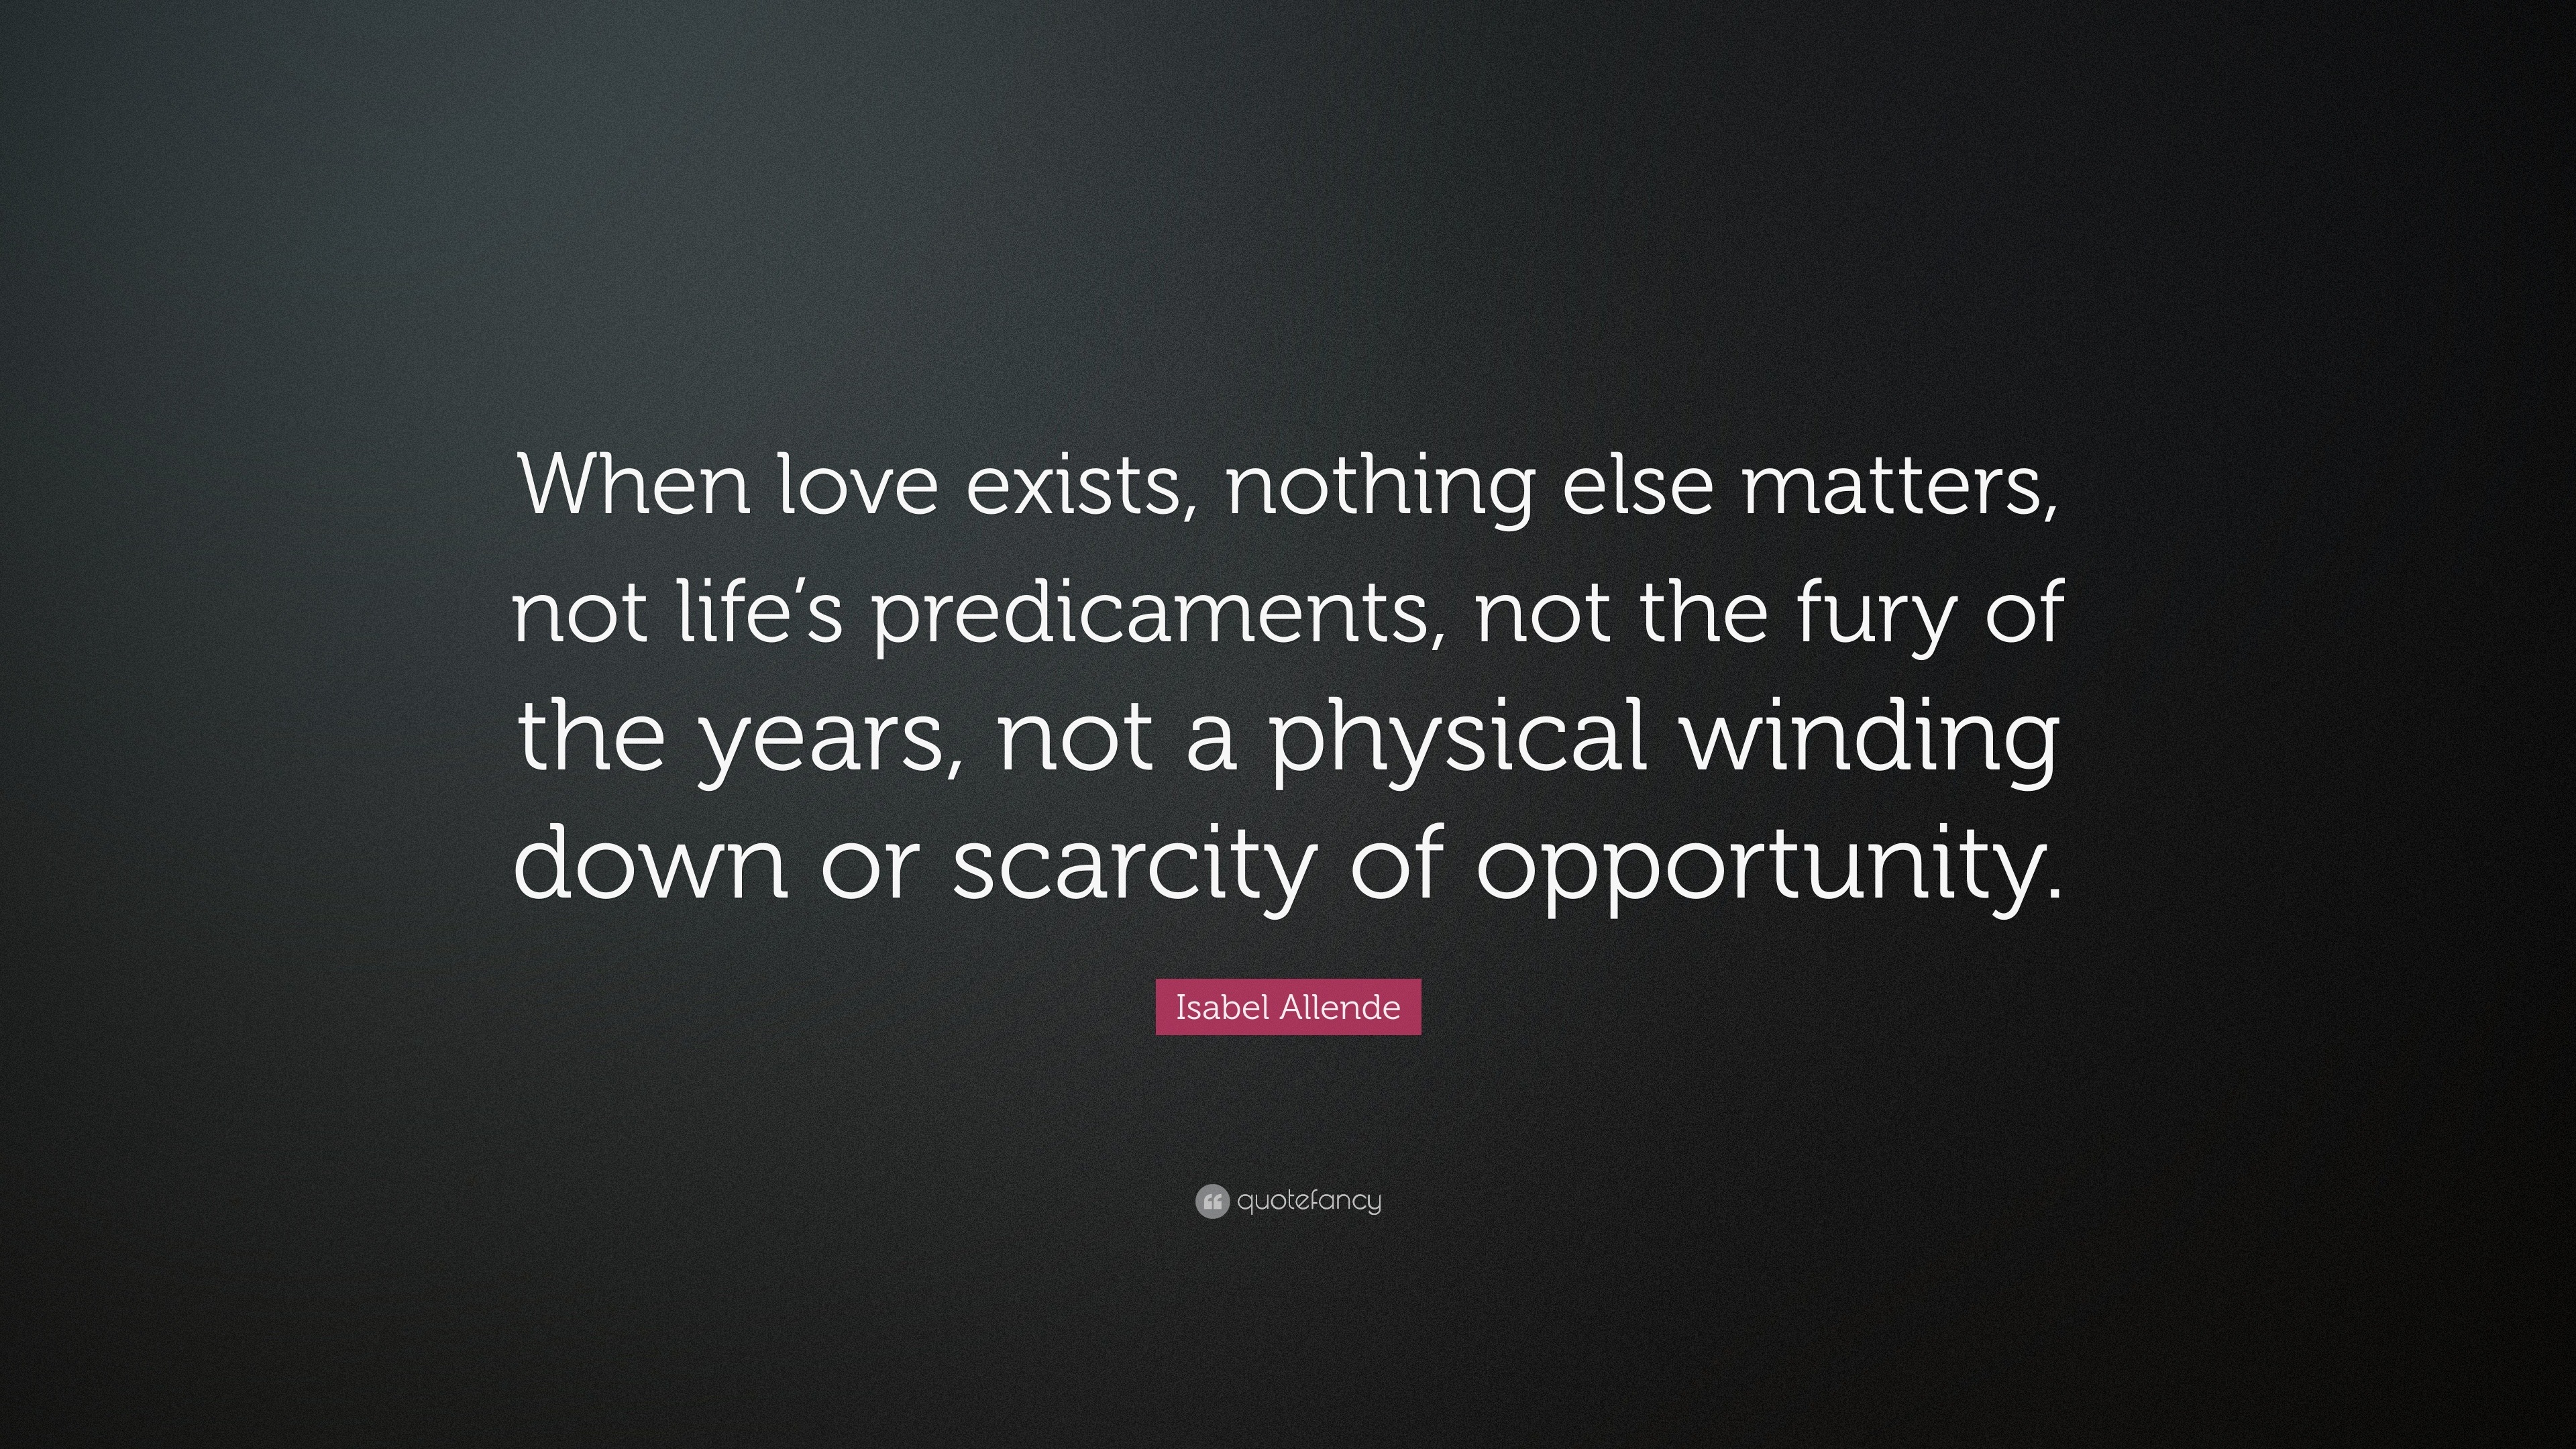 Isabel Allende Quote “When love exists nothing else matters not life s predicaments